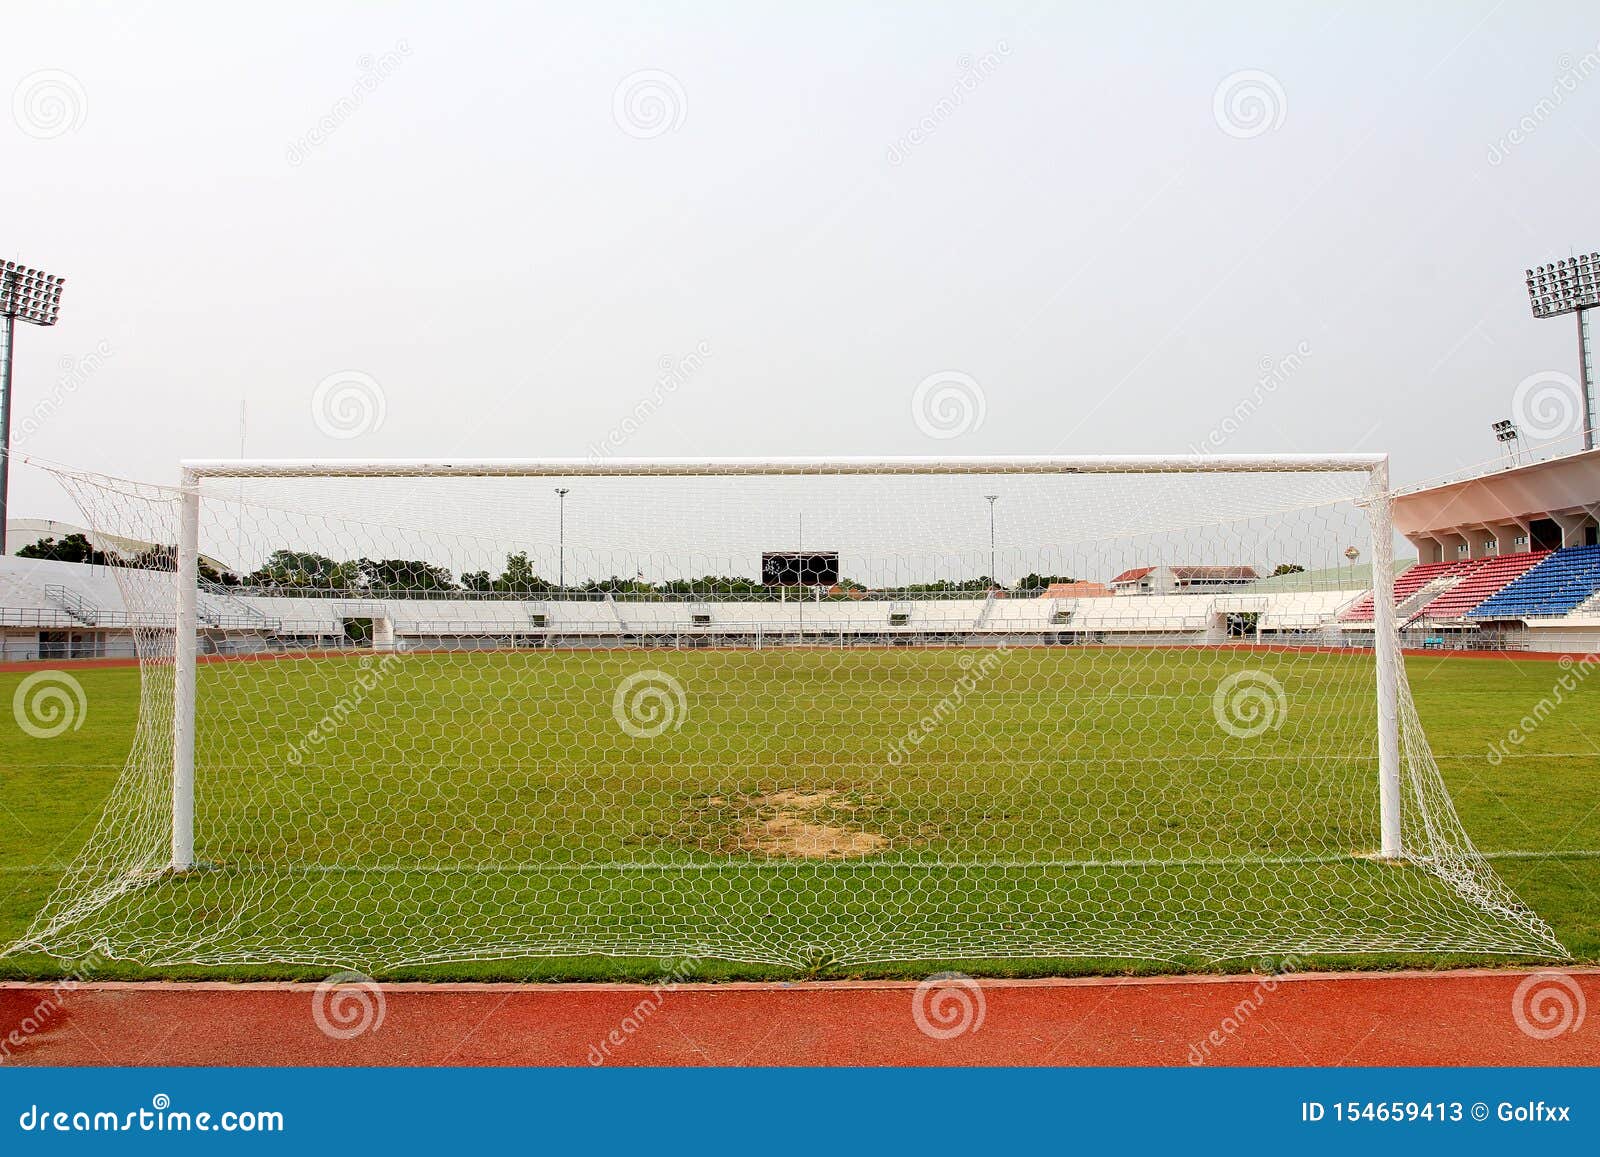 57 876 Soccer Goal Background Photos Free Royalty Free Stock Photos From Dreamstime